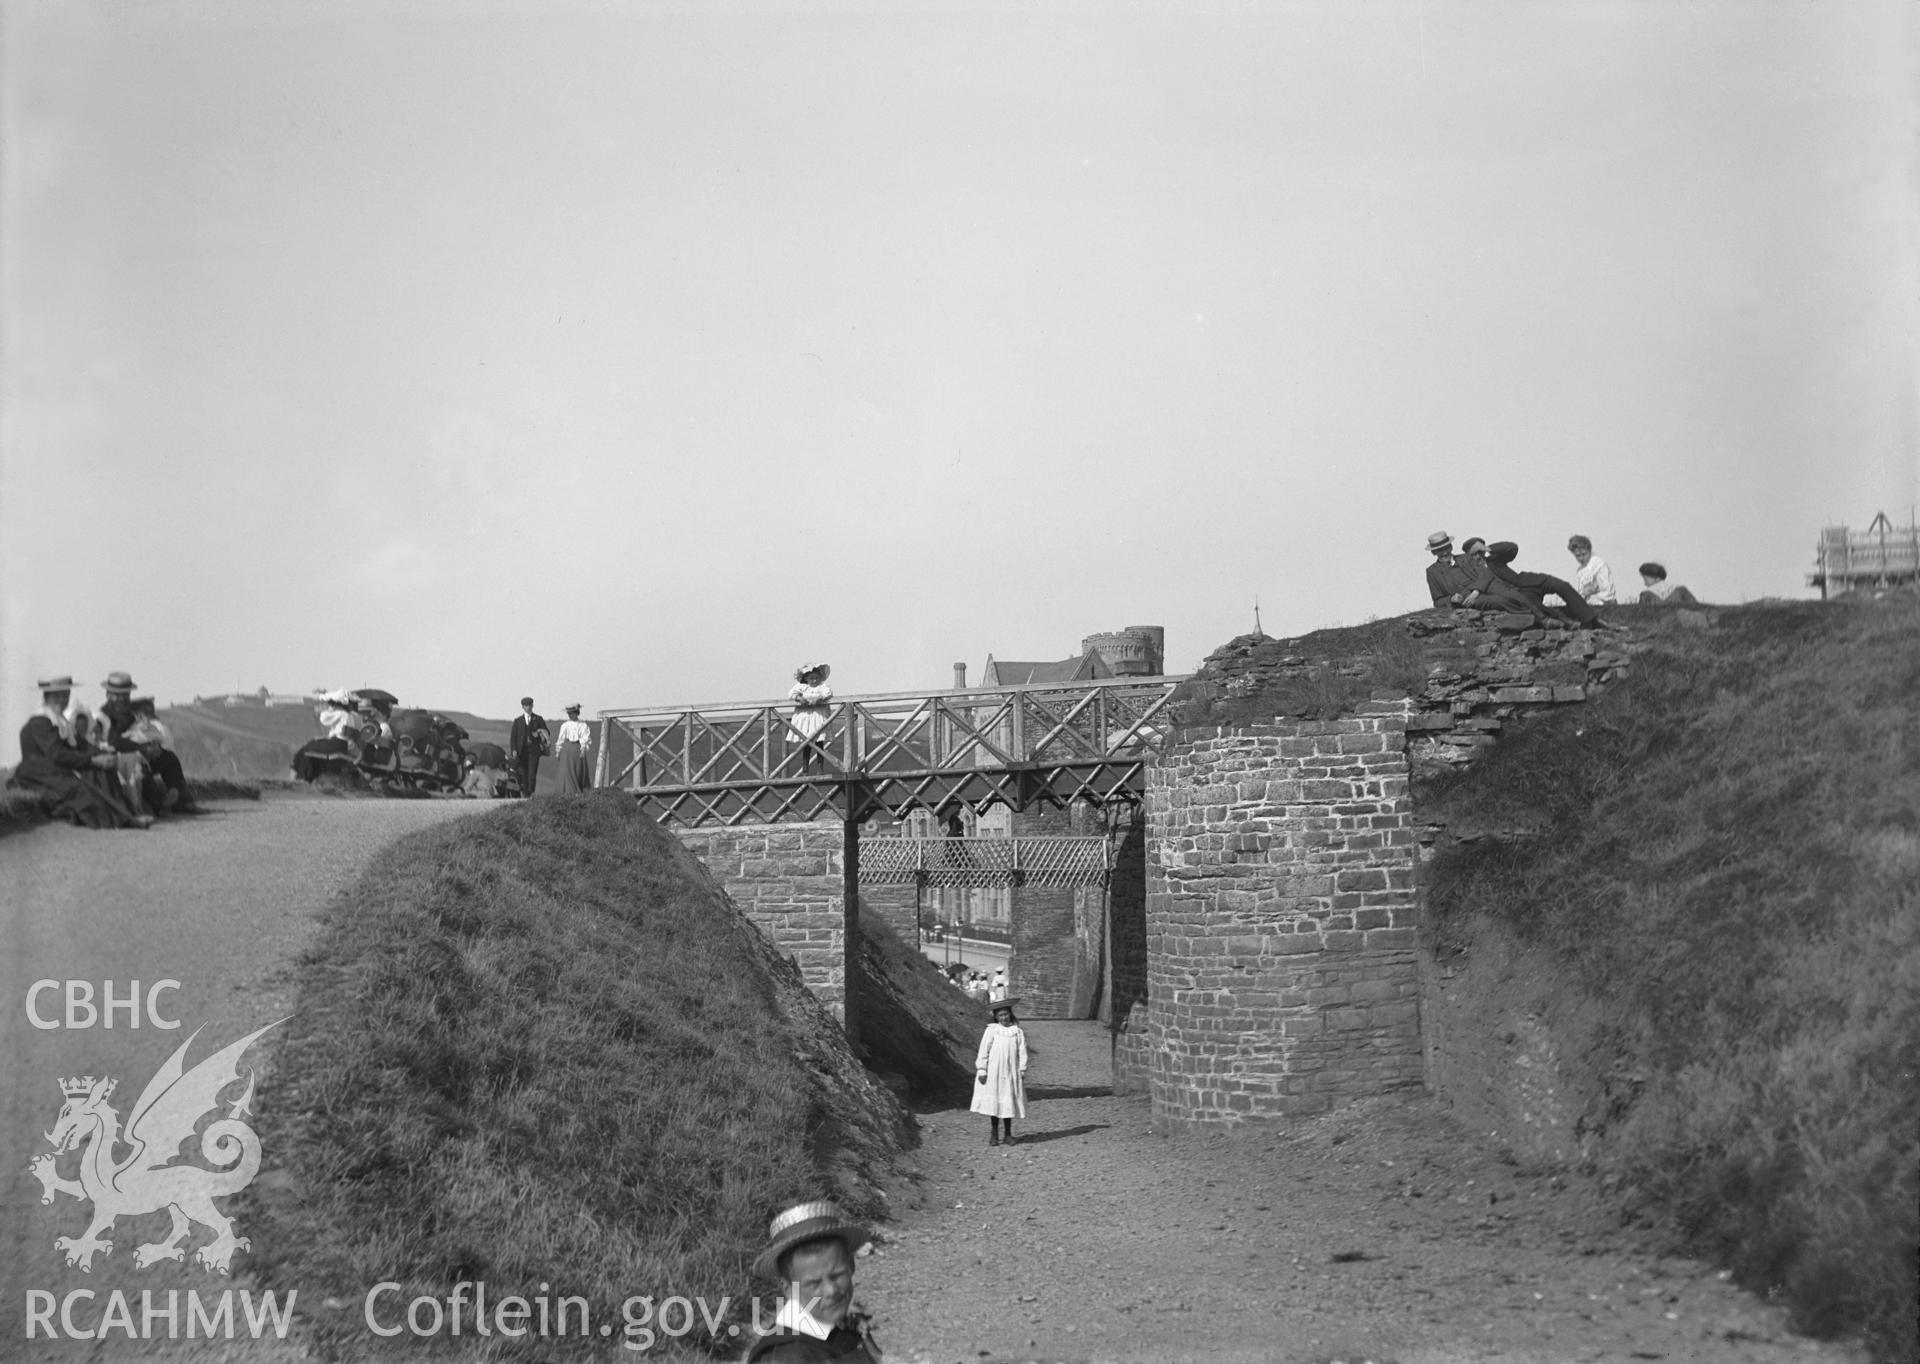 Black and white image dating from c.1910 showing the walkway across the moat at Aberystwyth Castle.